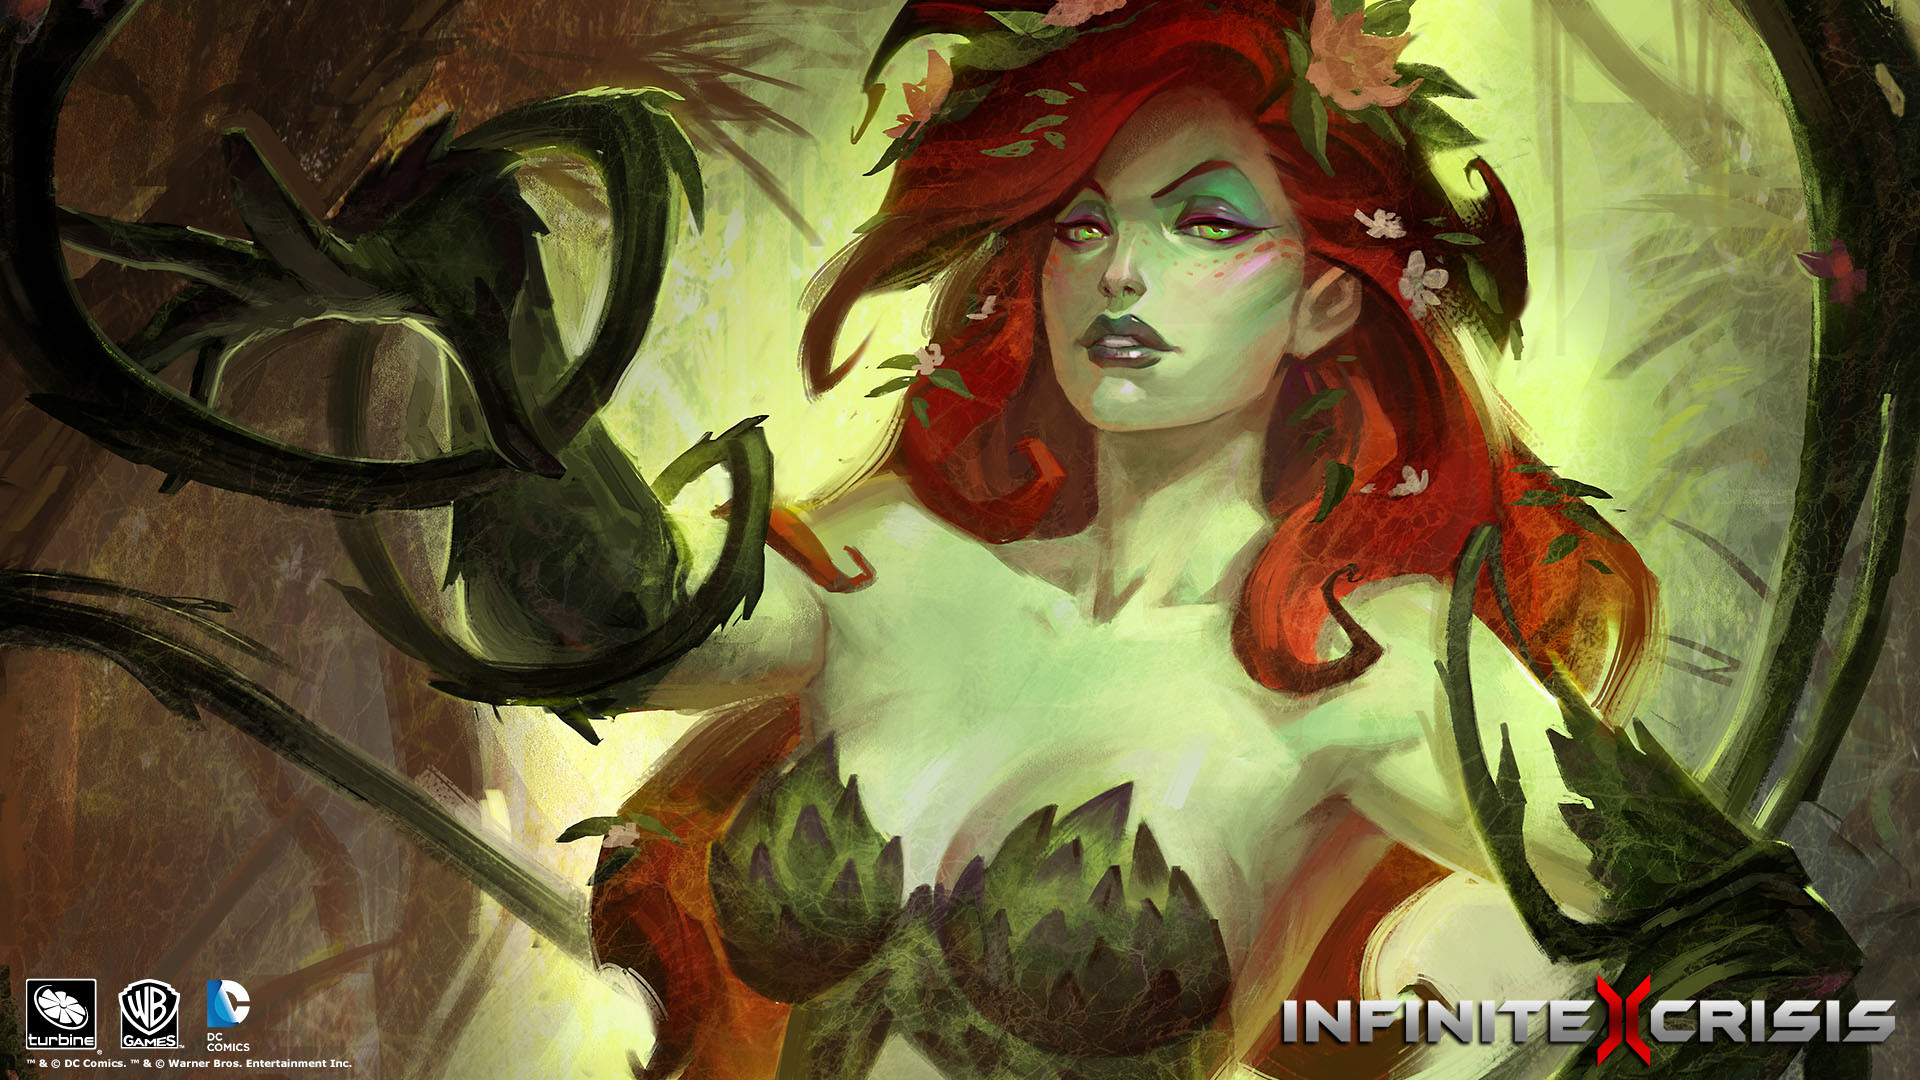 poison ivy wallpaper,cg artwork,poison ivy,fictional character,illustration,adventure game